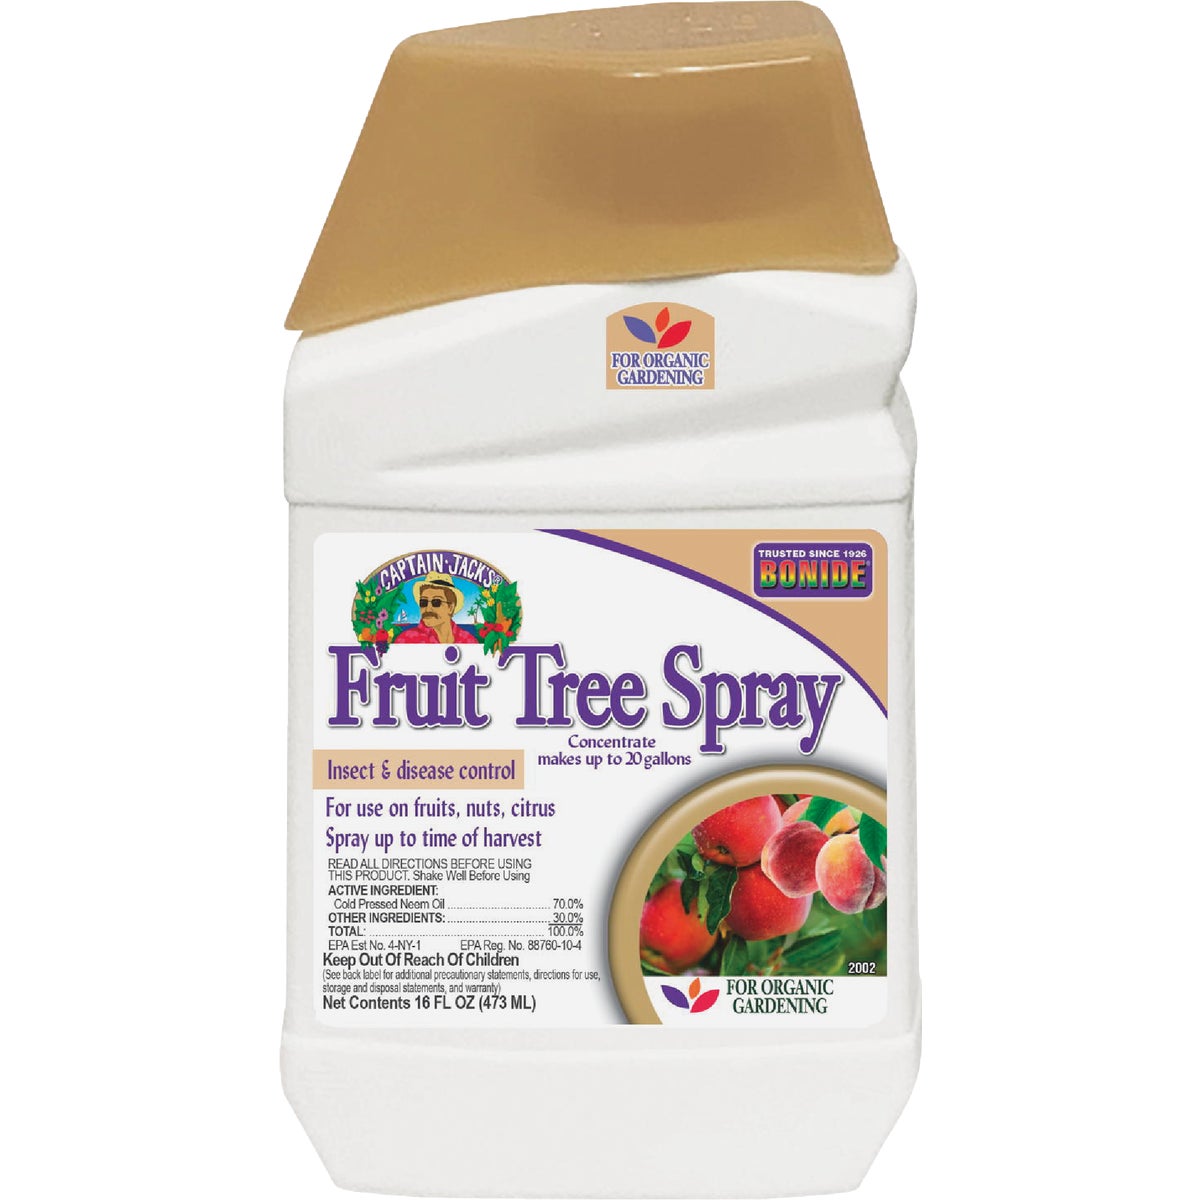 Item 760224, Protect your oasis with Captain Jack's Fruit Tree Spray.